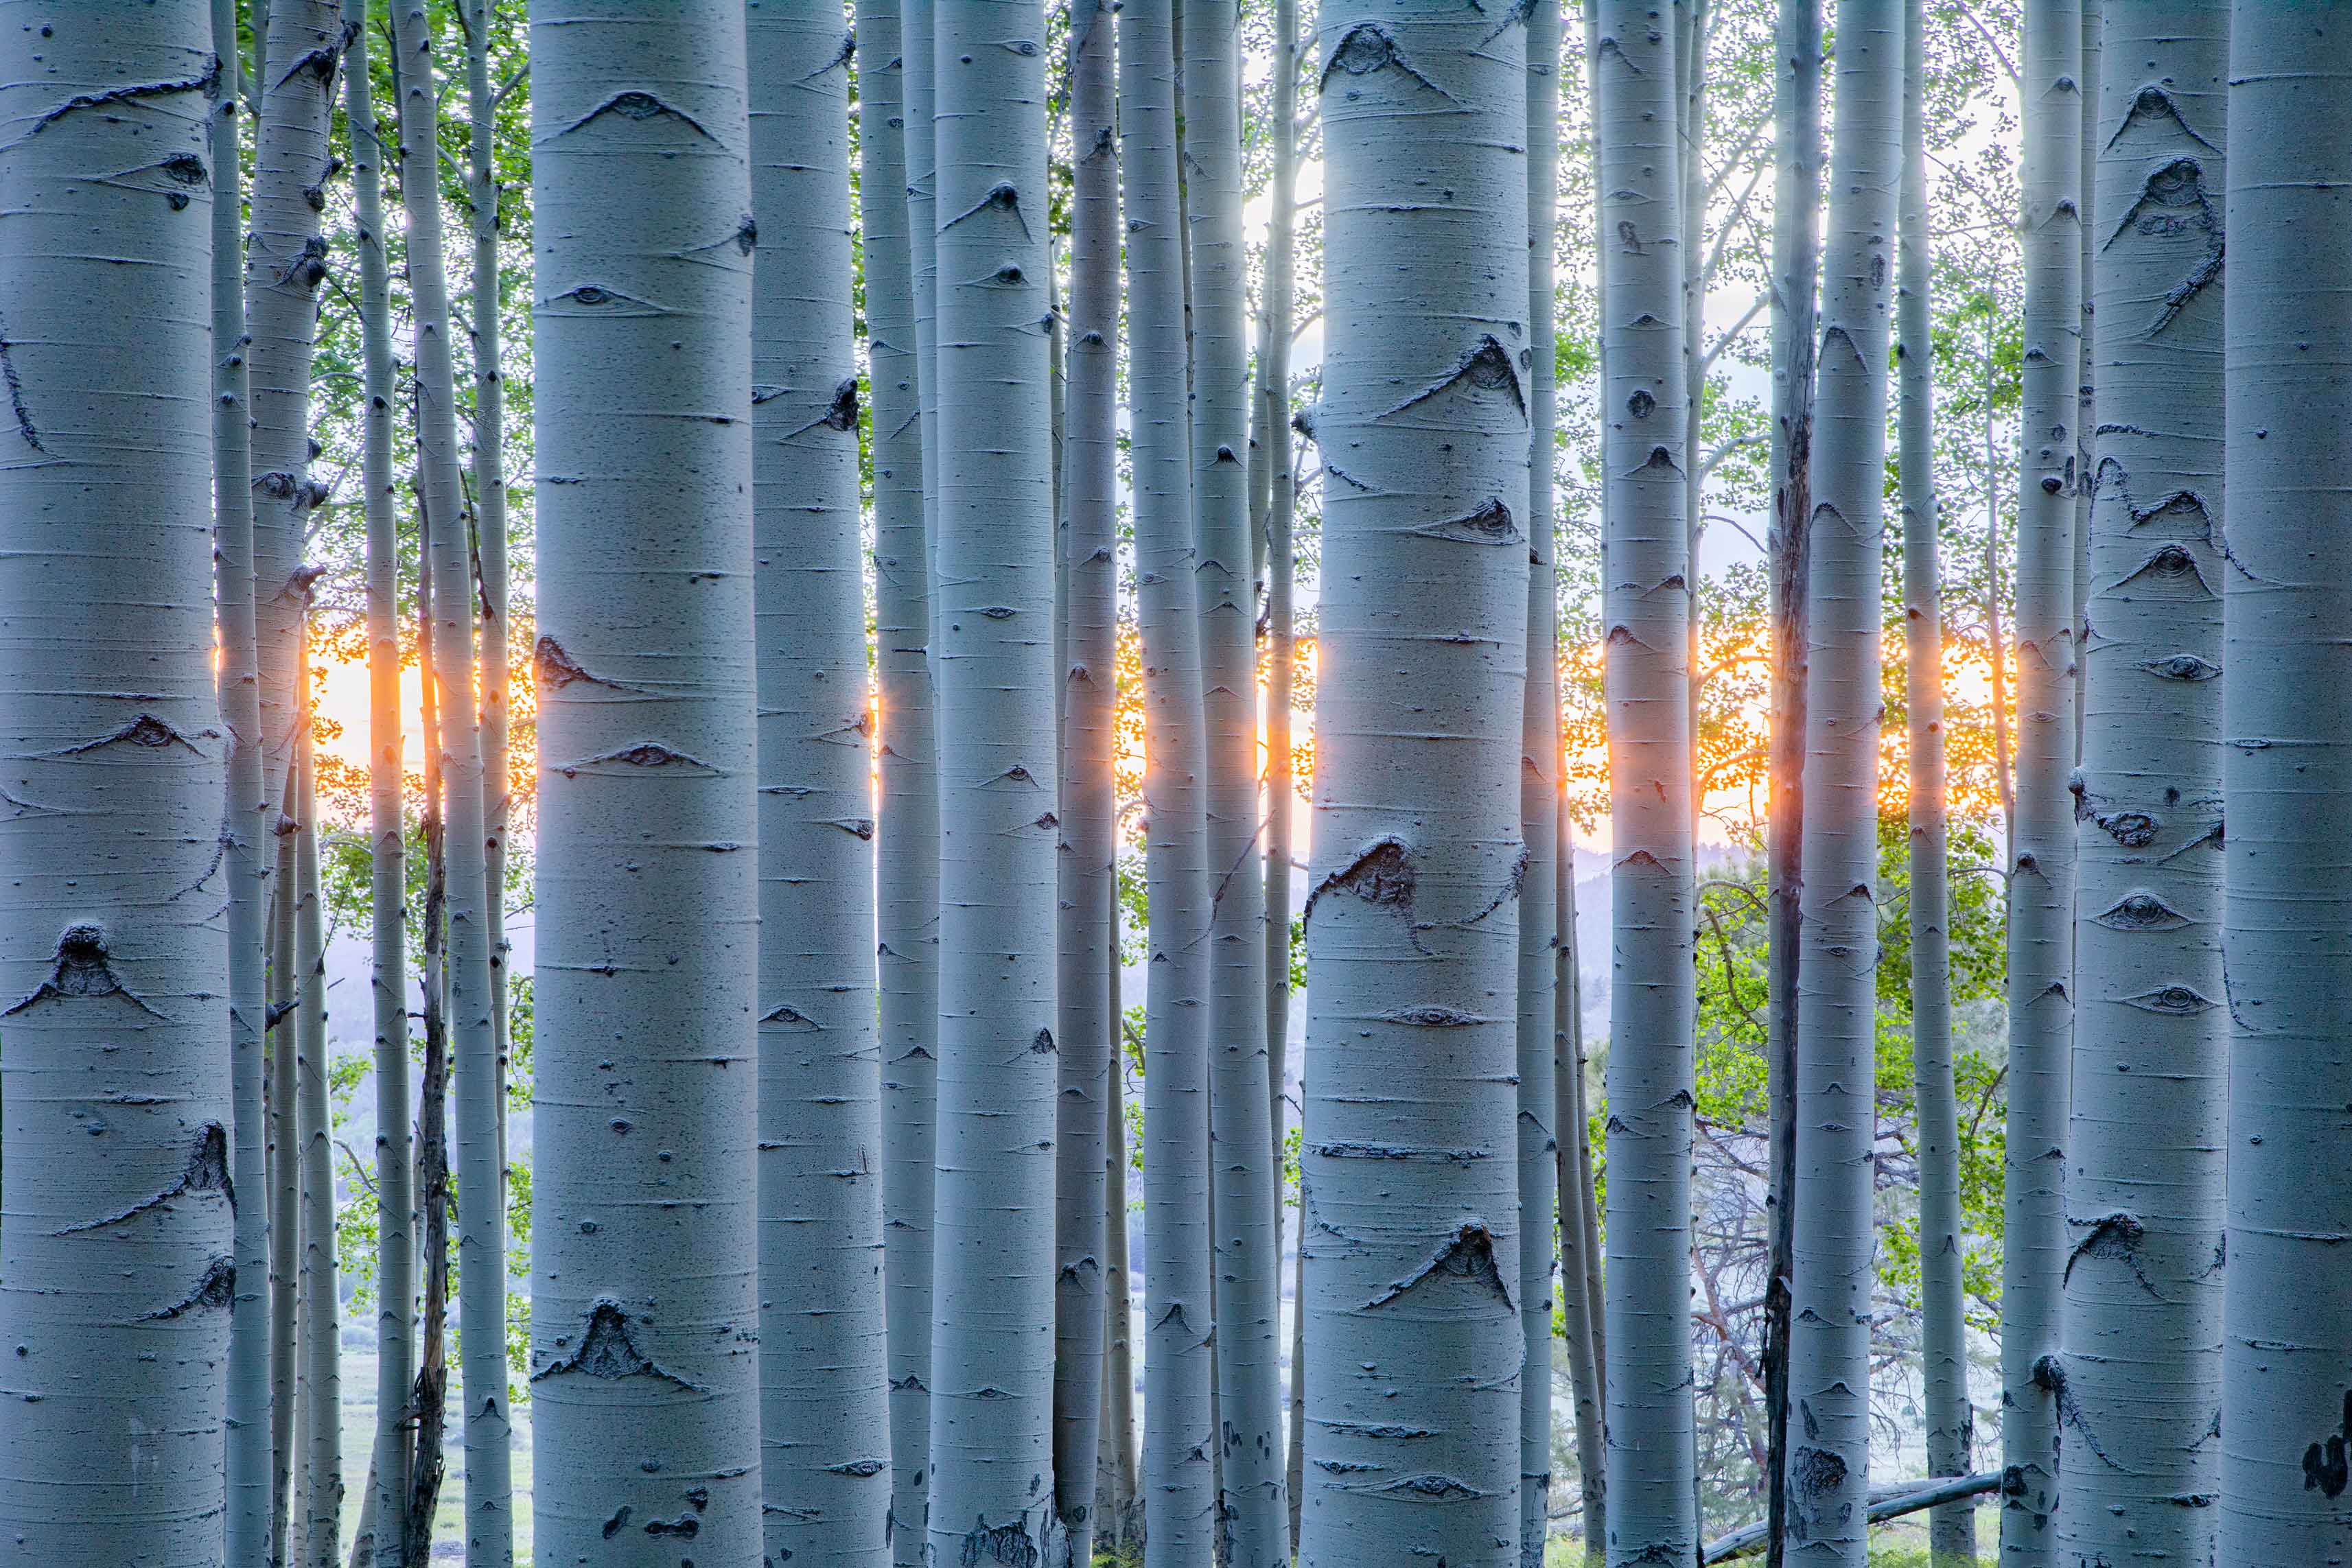 Aspens in the San Francisco Peaks, Arizona. In the background is a strip of clear sky between the horizon and clouds during the final minutes of sunset.